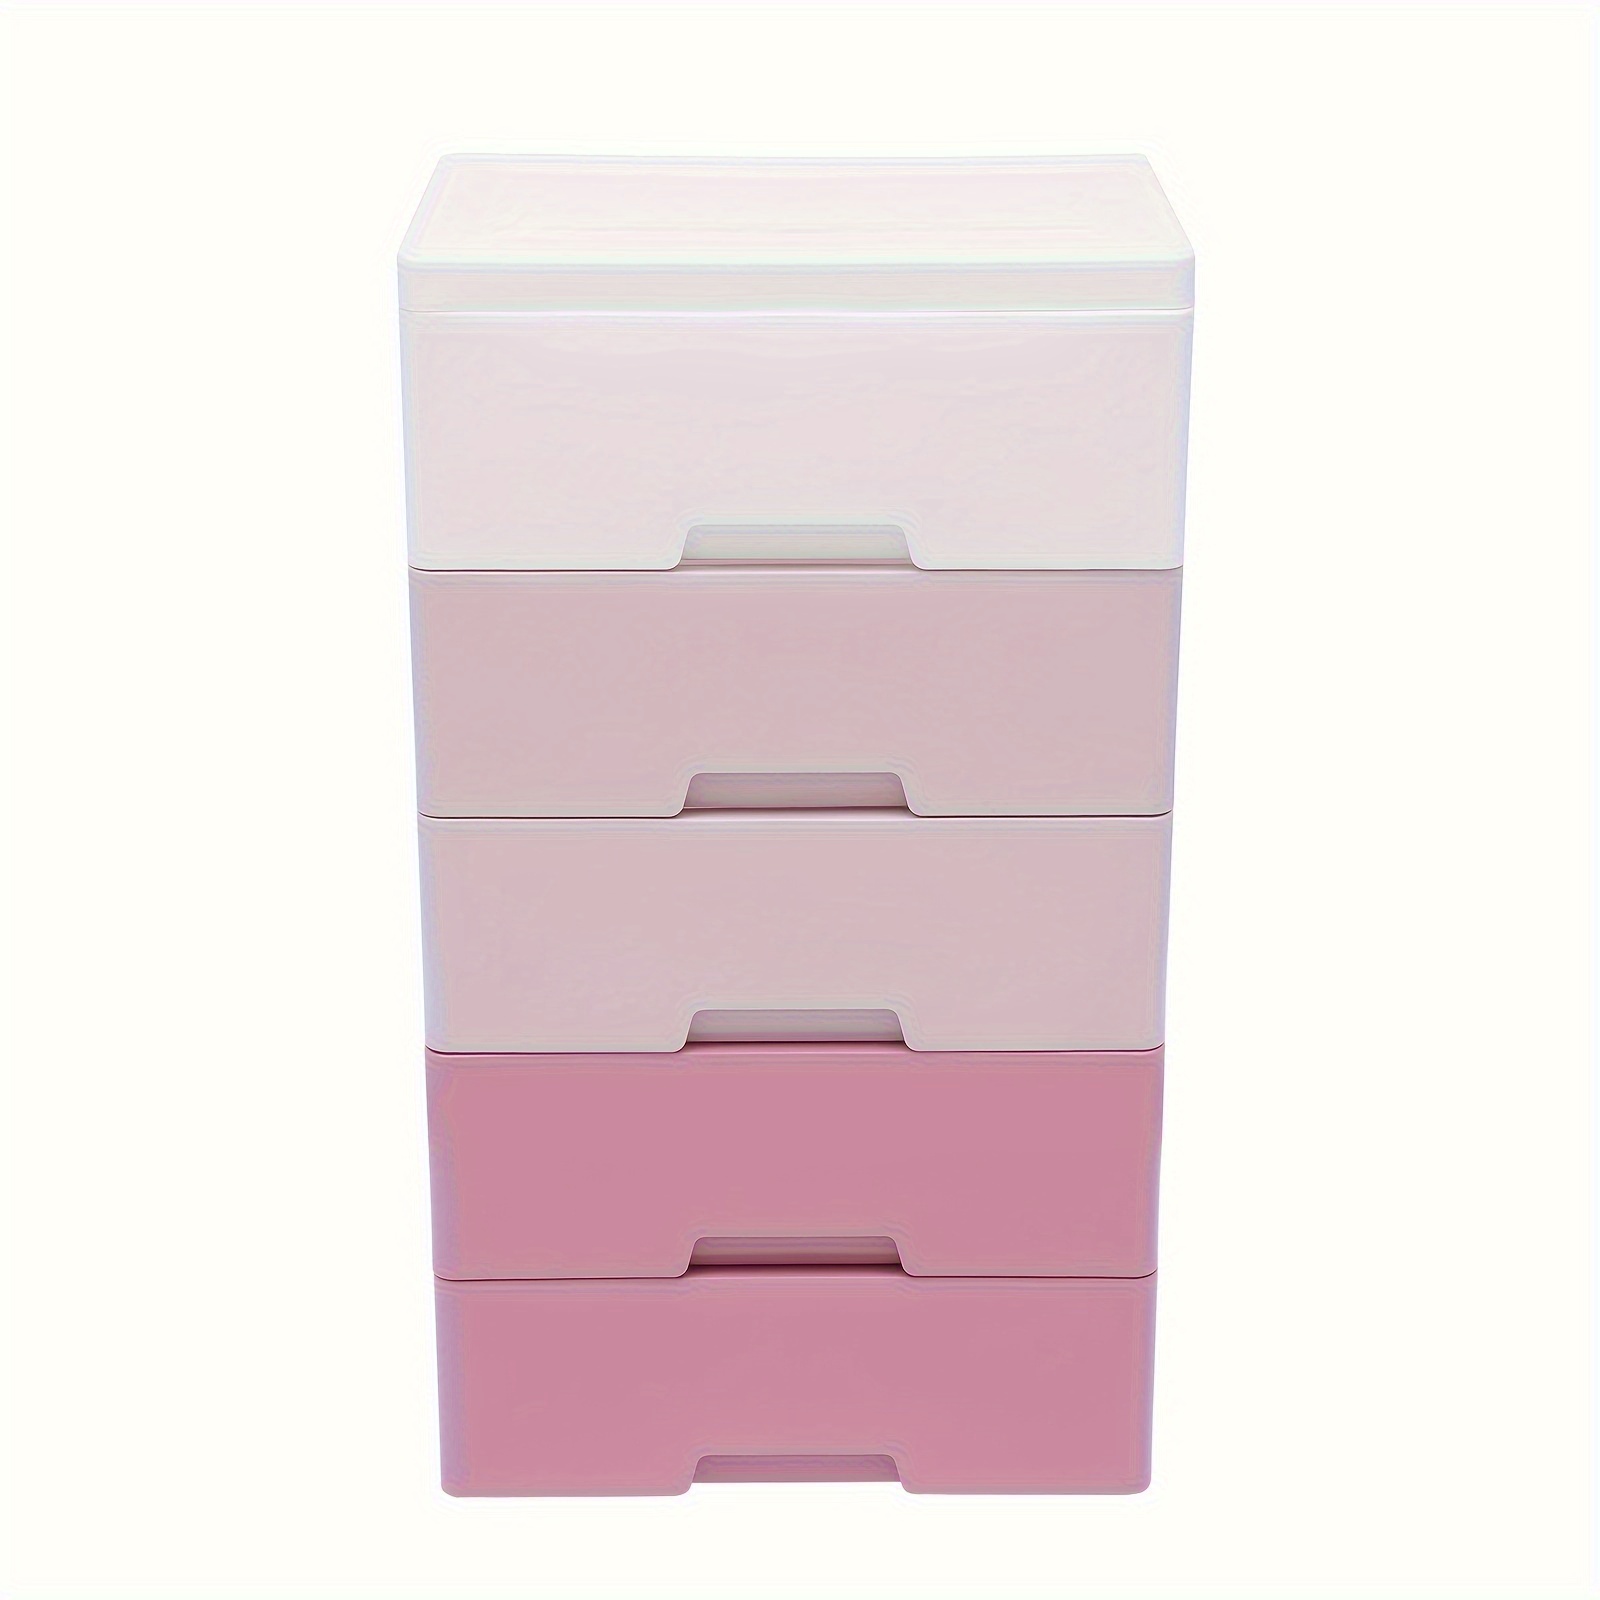 

Plastic Storage Drawer Cabinet - Gradient Pink Rectangular Multipurpose Organizer With Spacious Non-waterproof Drawers For Home, Toys, And Sundries